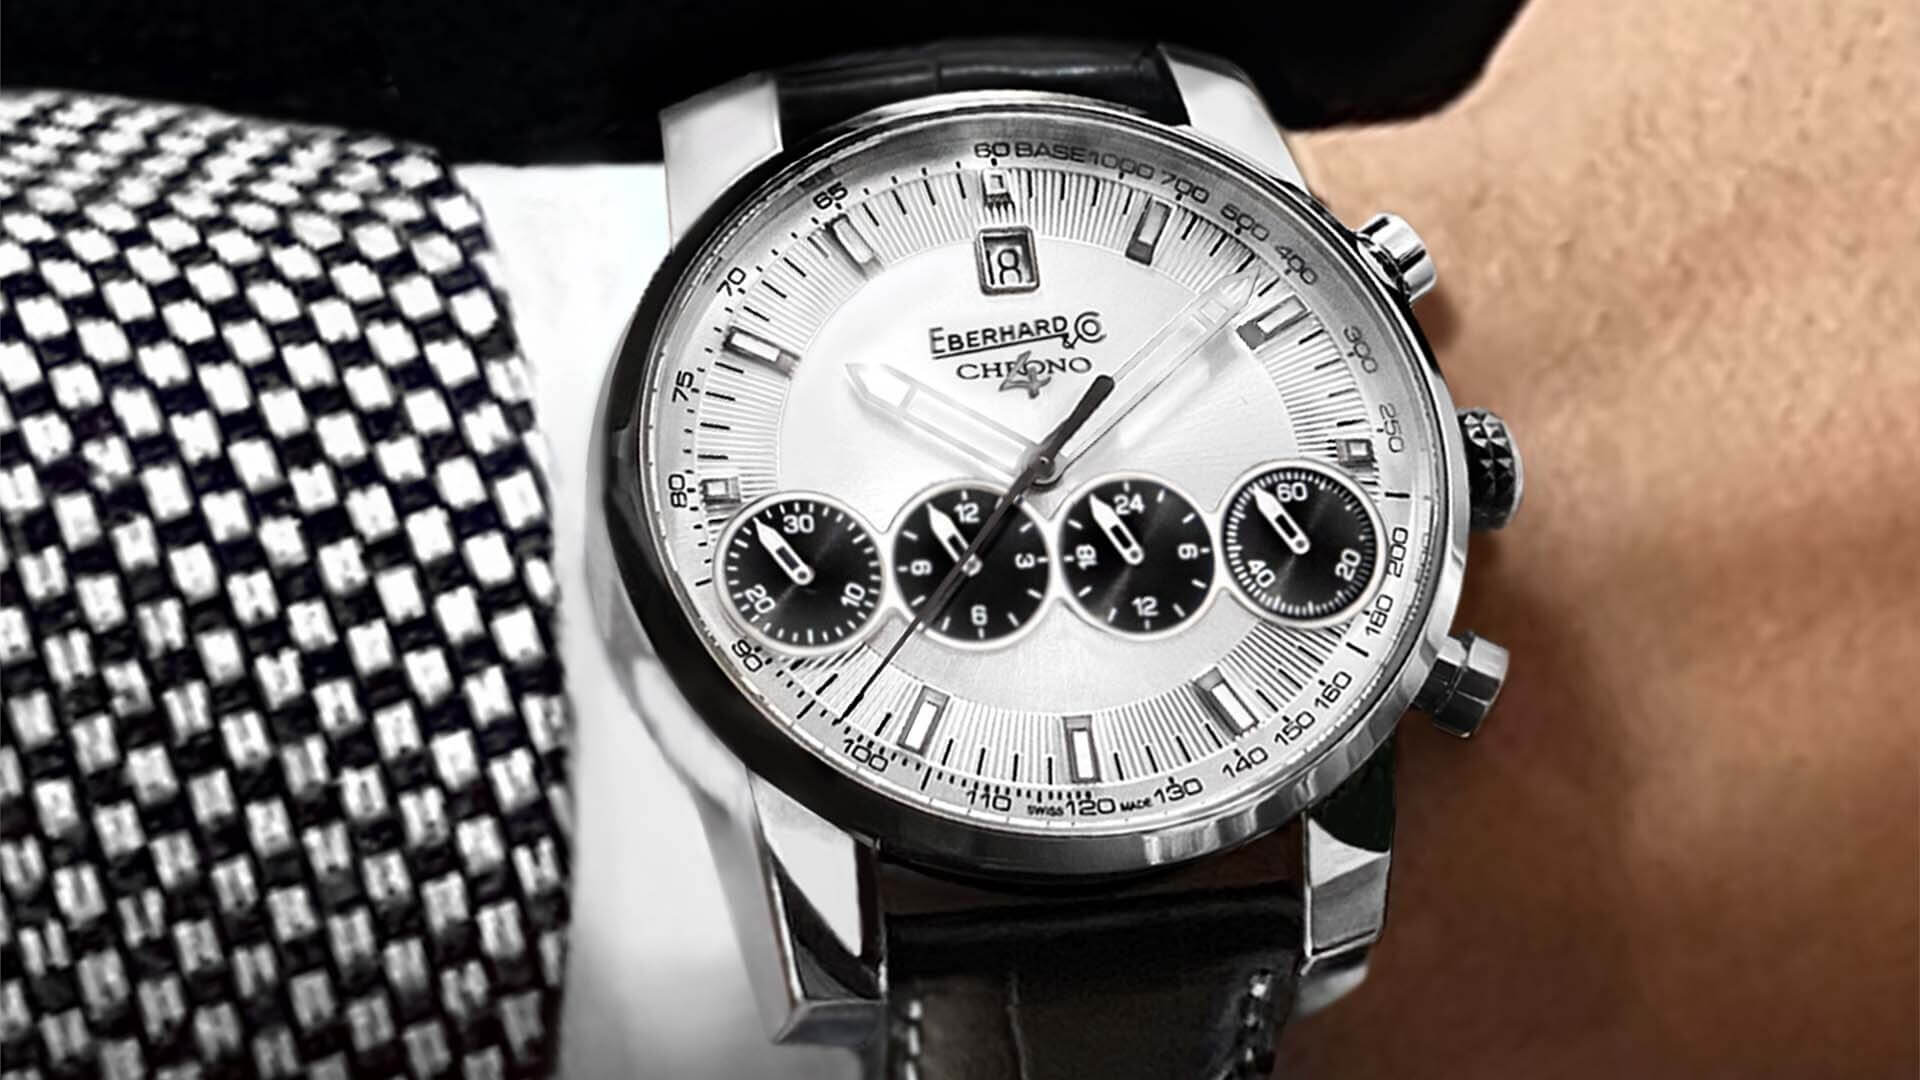 Celebrate 20 years of Chrono 4 & the New Edition “21-42” by EBERHARD & CO.